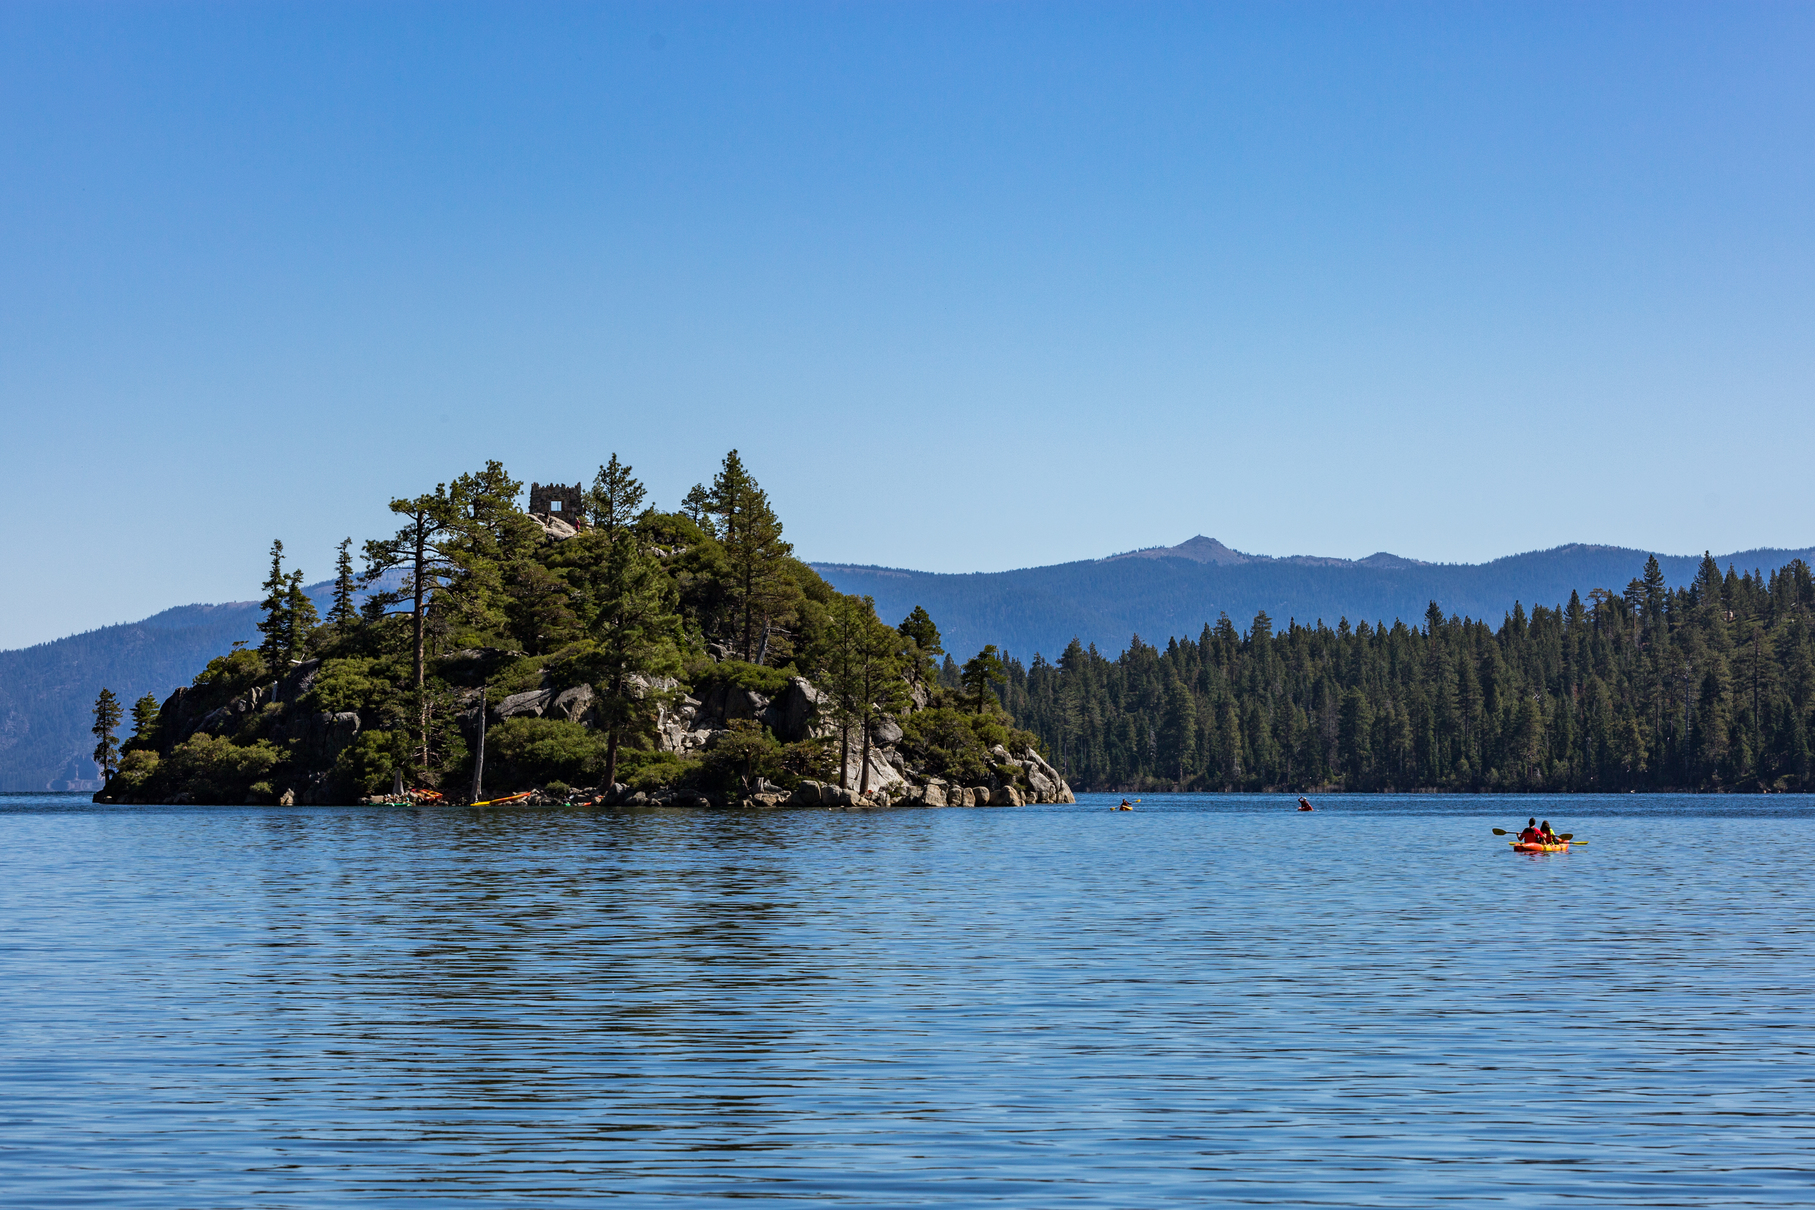 kayaking Emerald Bay Lake Tahoe with Fannette Island in the center